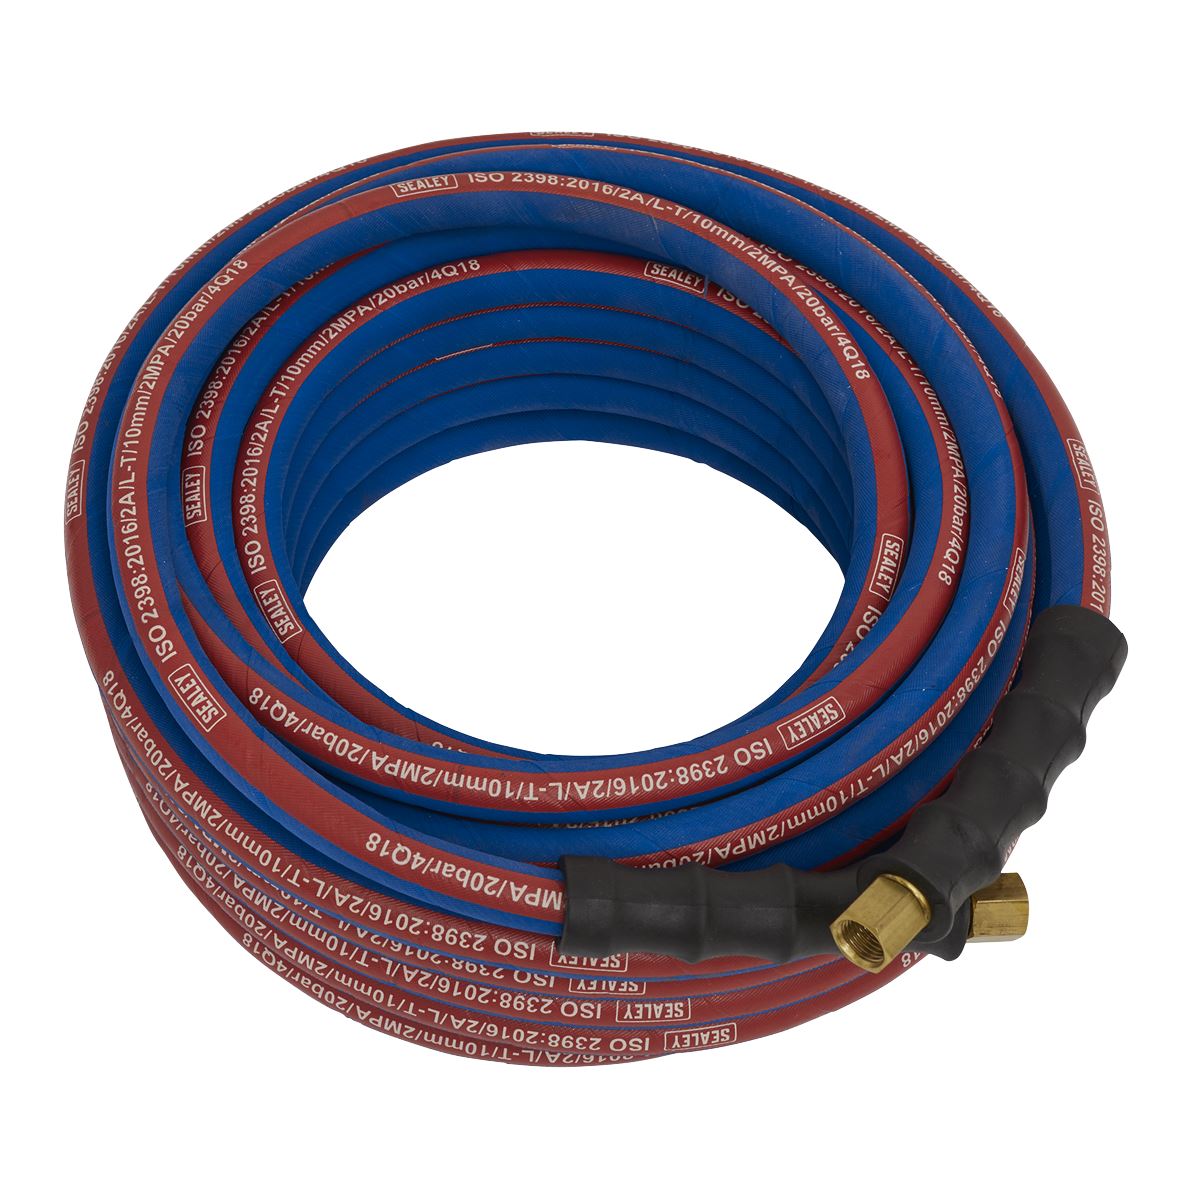 Sealey Air Hose 15m x Ø10mm with 1/4"BSP Unions Extra-Heavy-Duty